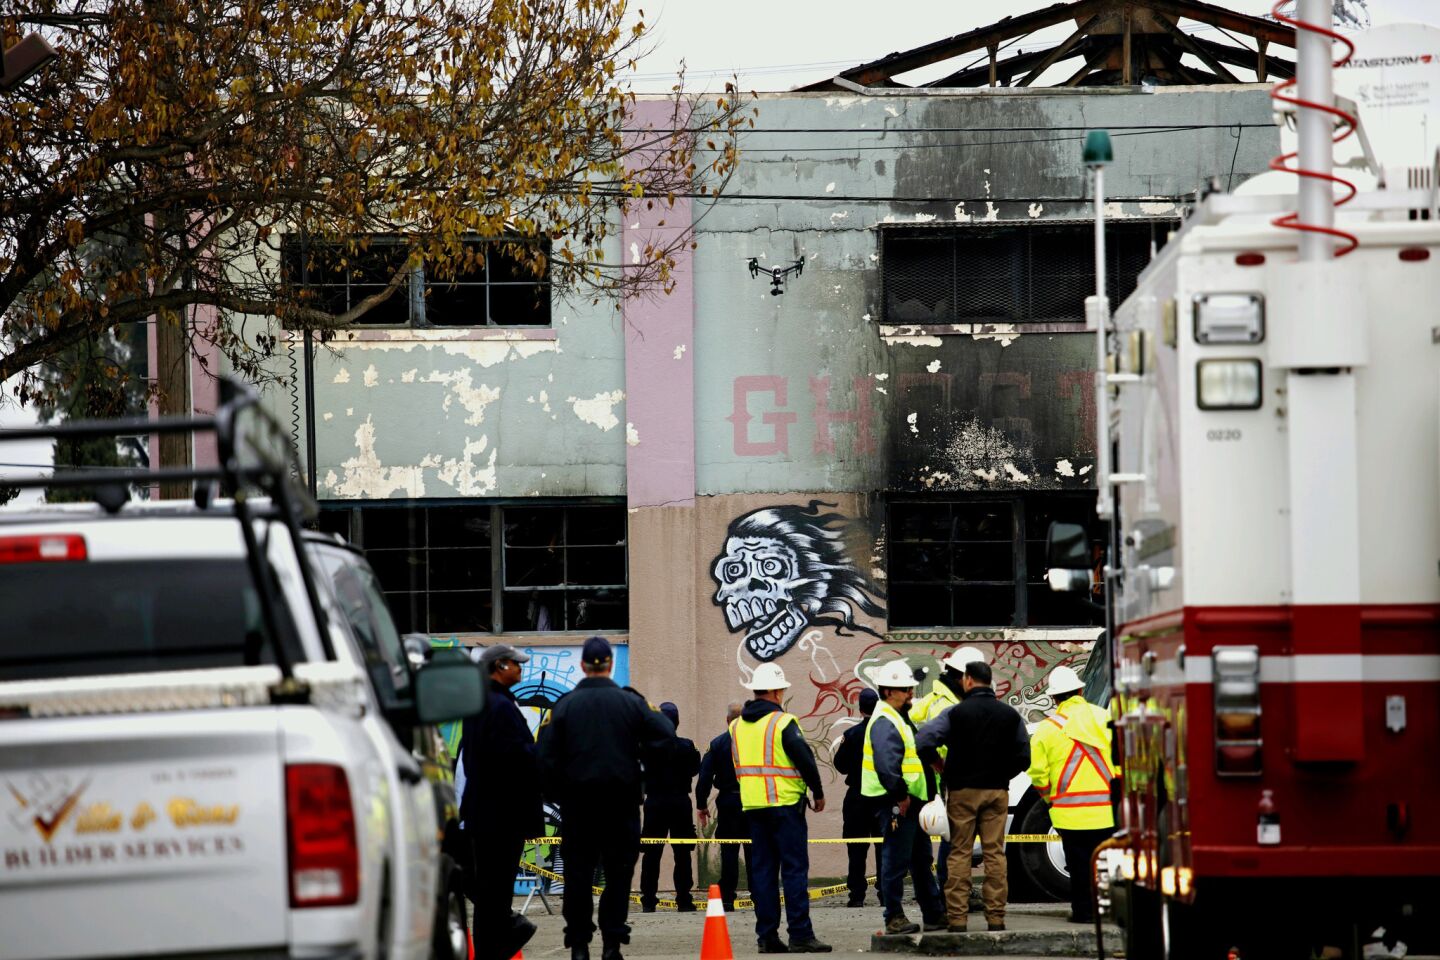 A drone flies over investigators outside Oakland's Ghost Ship warehouse, where 36 people died this month in one of the worst fires in modern California history.